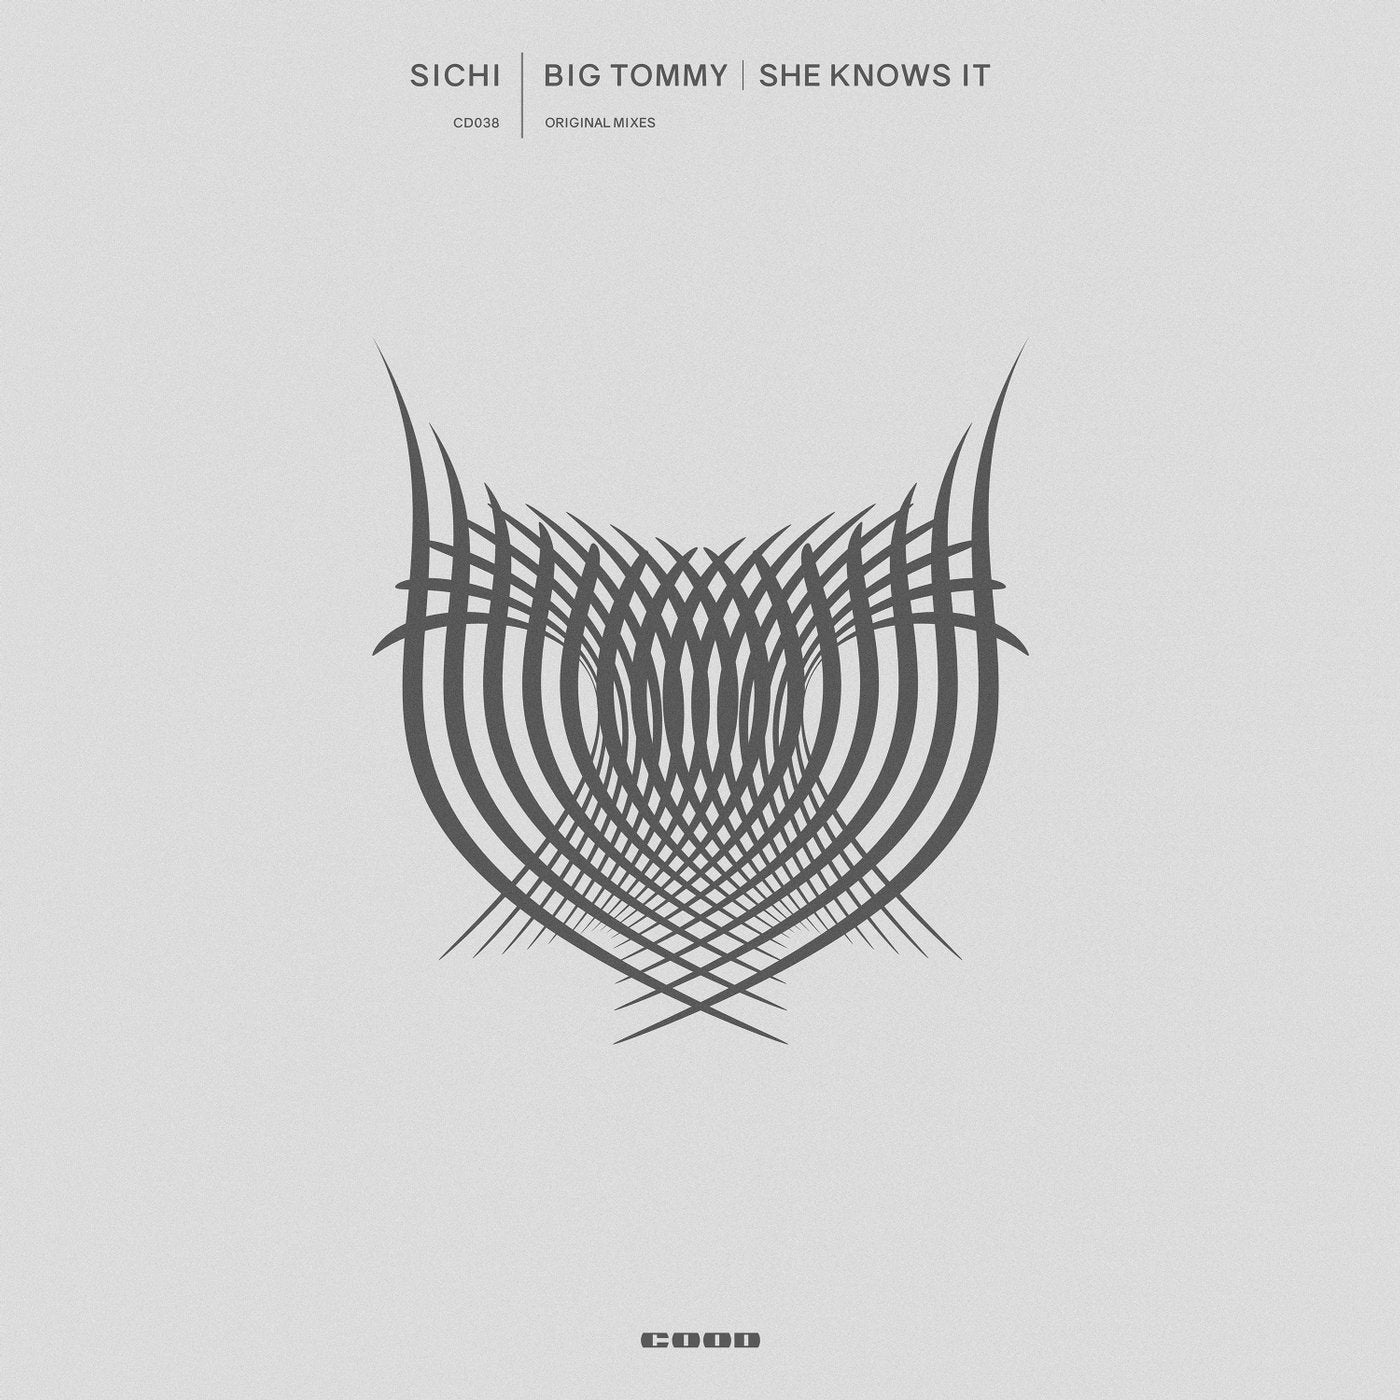 Big Tommy / She Knows It